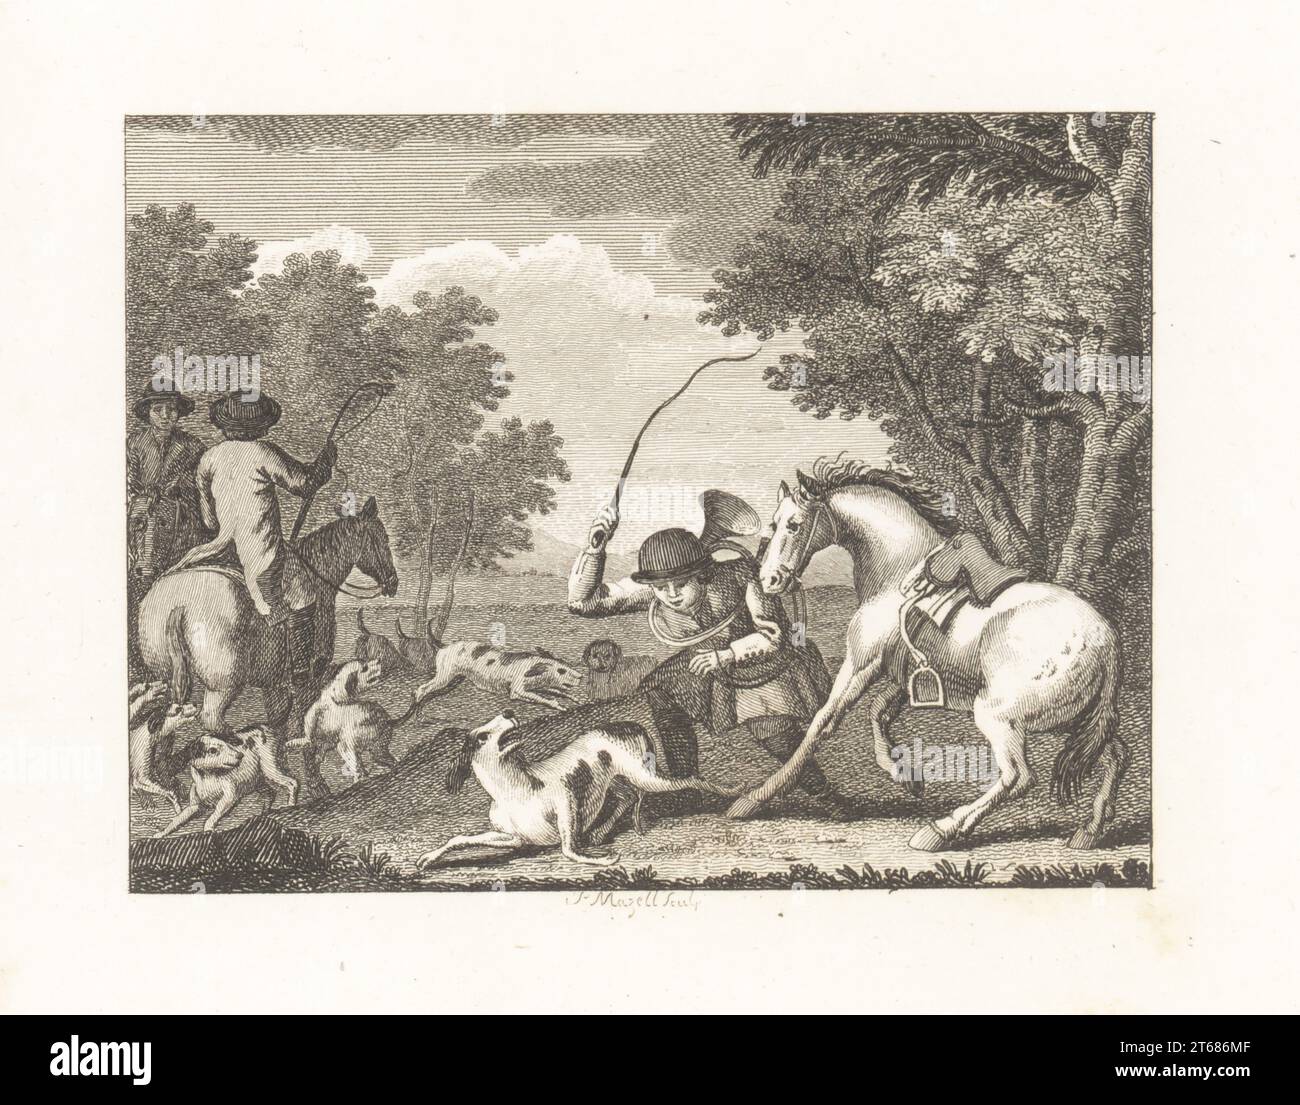 The Hound and the Huntsman. A huntsman with horn, dismounts his horse and thrashes a young fox hound Ringwood for barking. Copperplate engraving by Peter Mazell after an illustration by John Wootton from Fables by John Gay, with a Life of the Author, John Stockdale, London, 1793. Stock Photo